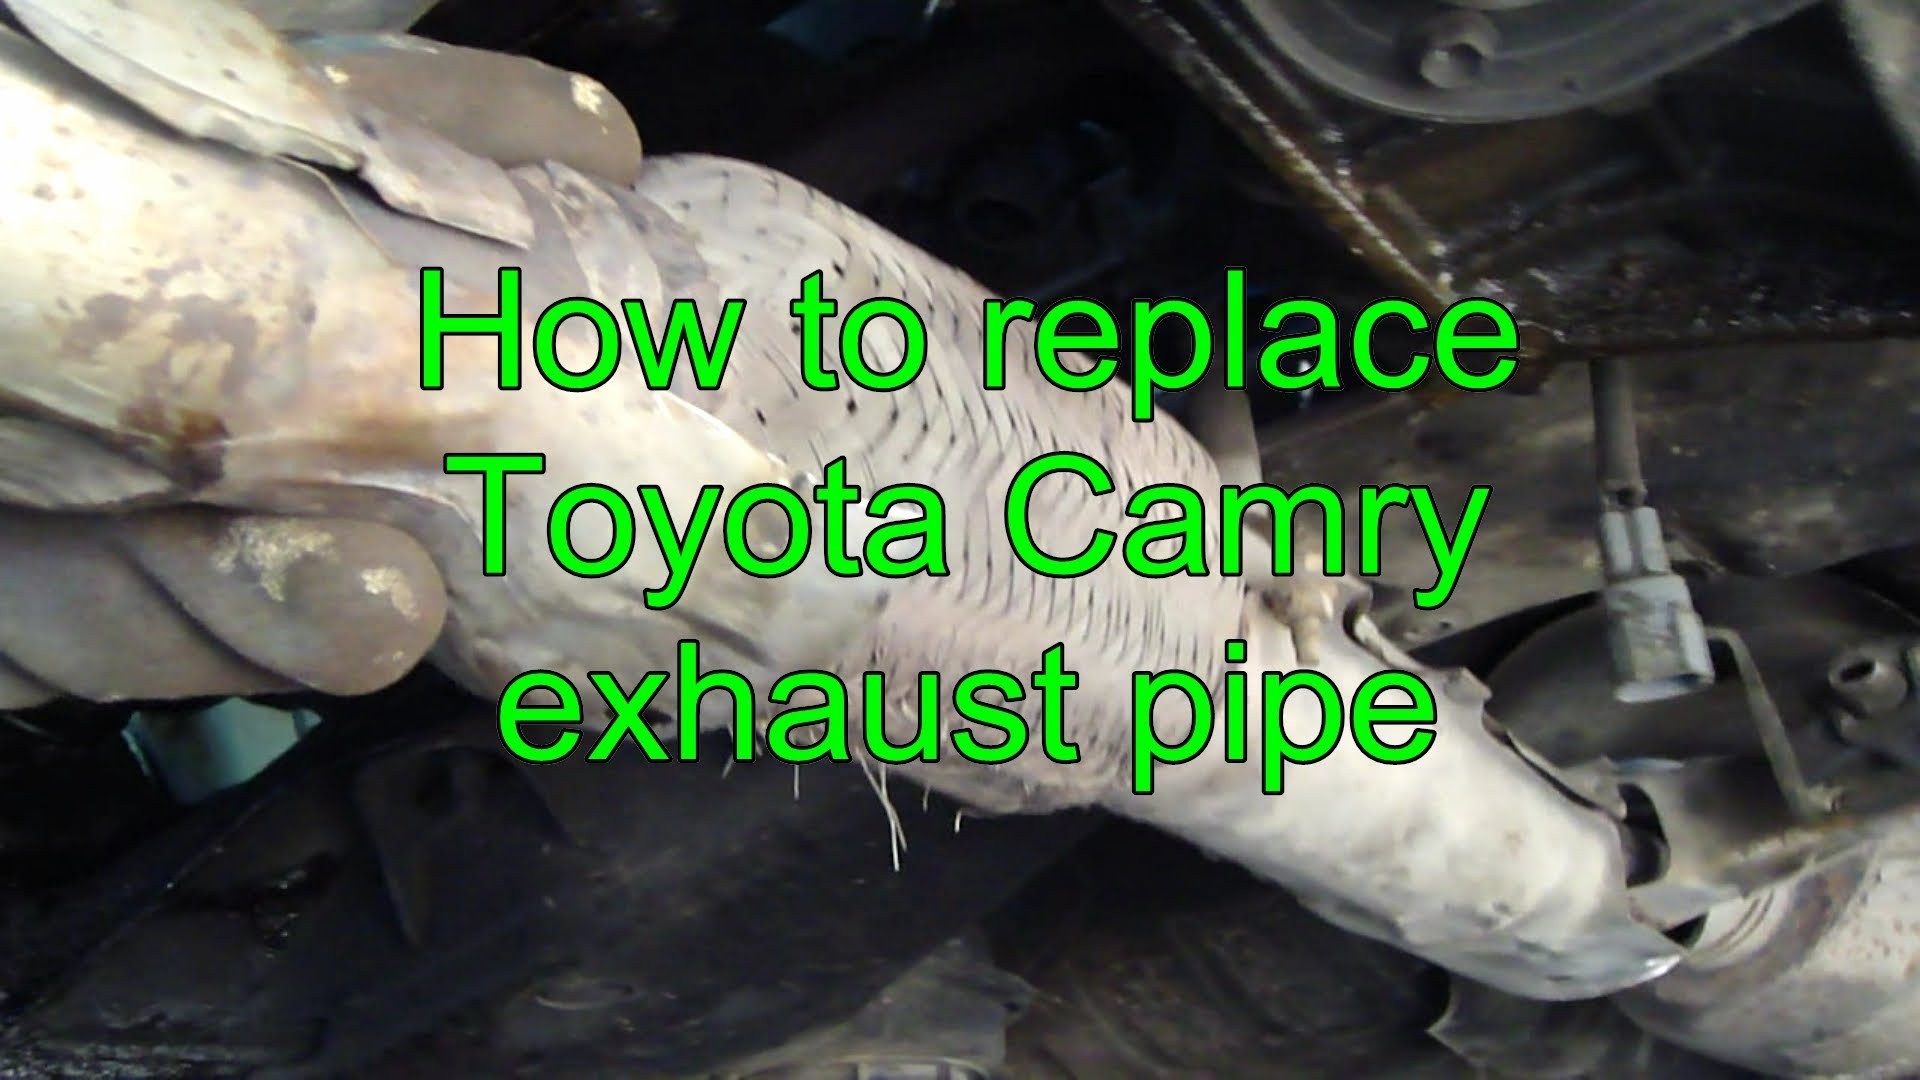 Toyota Camry 2003 Engine Diagram How to Replace toyota Camry Exhaust Pipe Years 1992 to 2002 Of Toyota Camry 2003 Engine Diagram